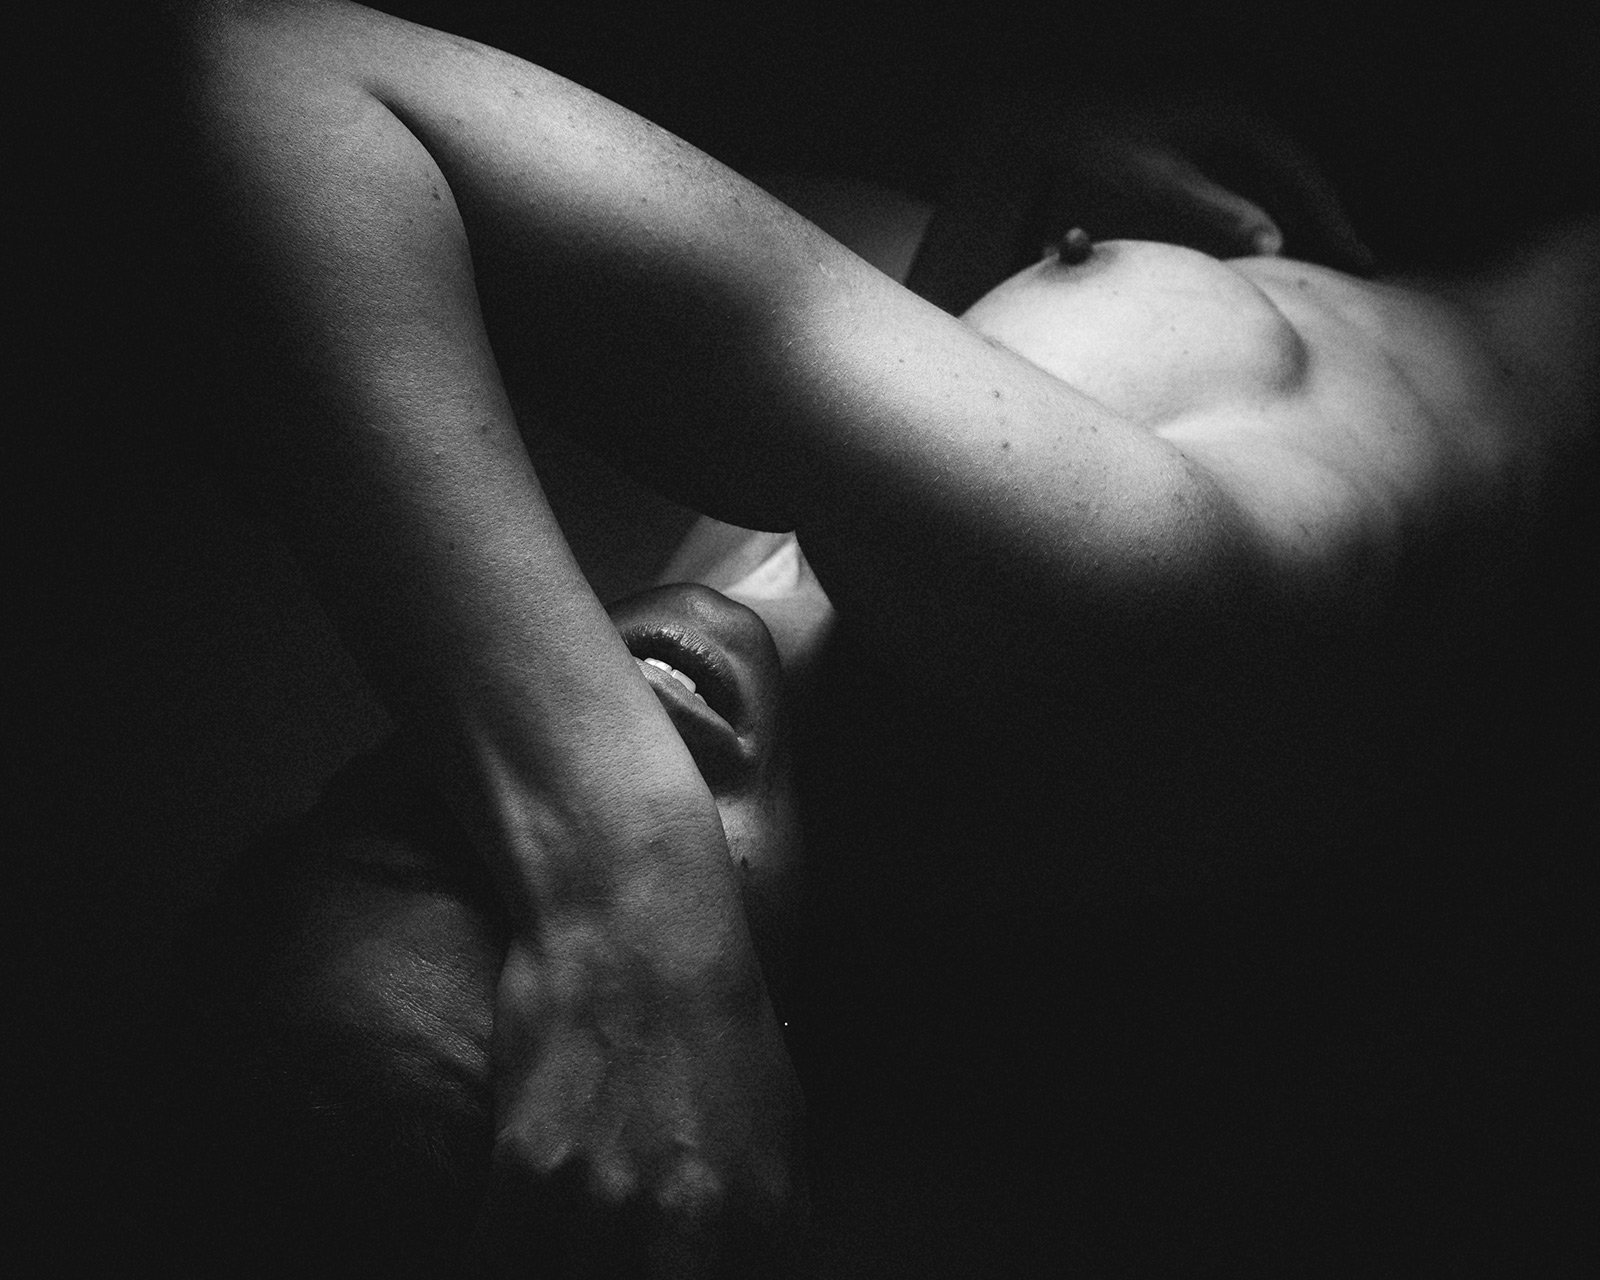 fine, art, nudes, nude, sex, sexy, nudes, naked, orgasm, sensual, sensuality, black and white, expression, expressed, mood, dark, beauty, love, tenderness, dramatic, Дмитрий Толоконов